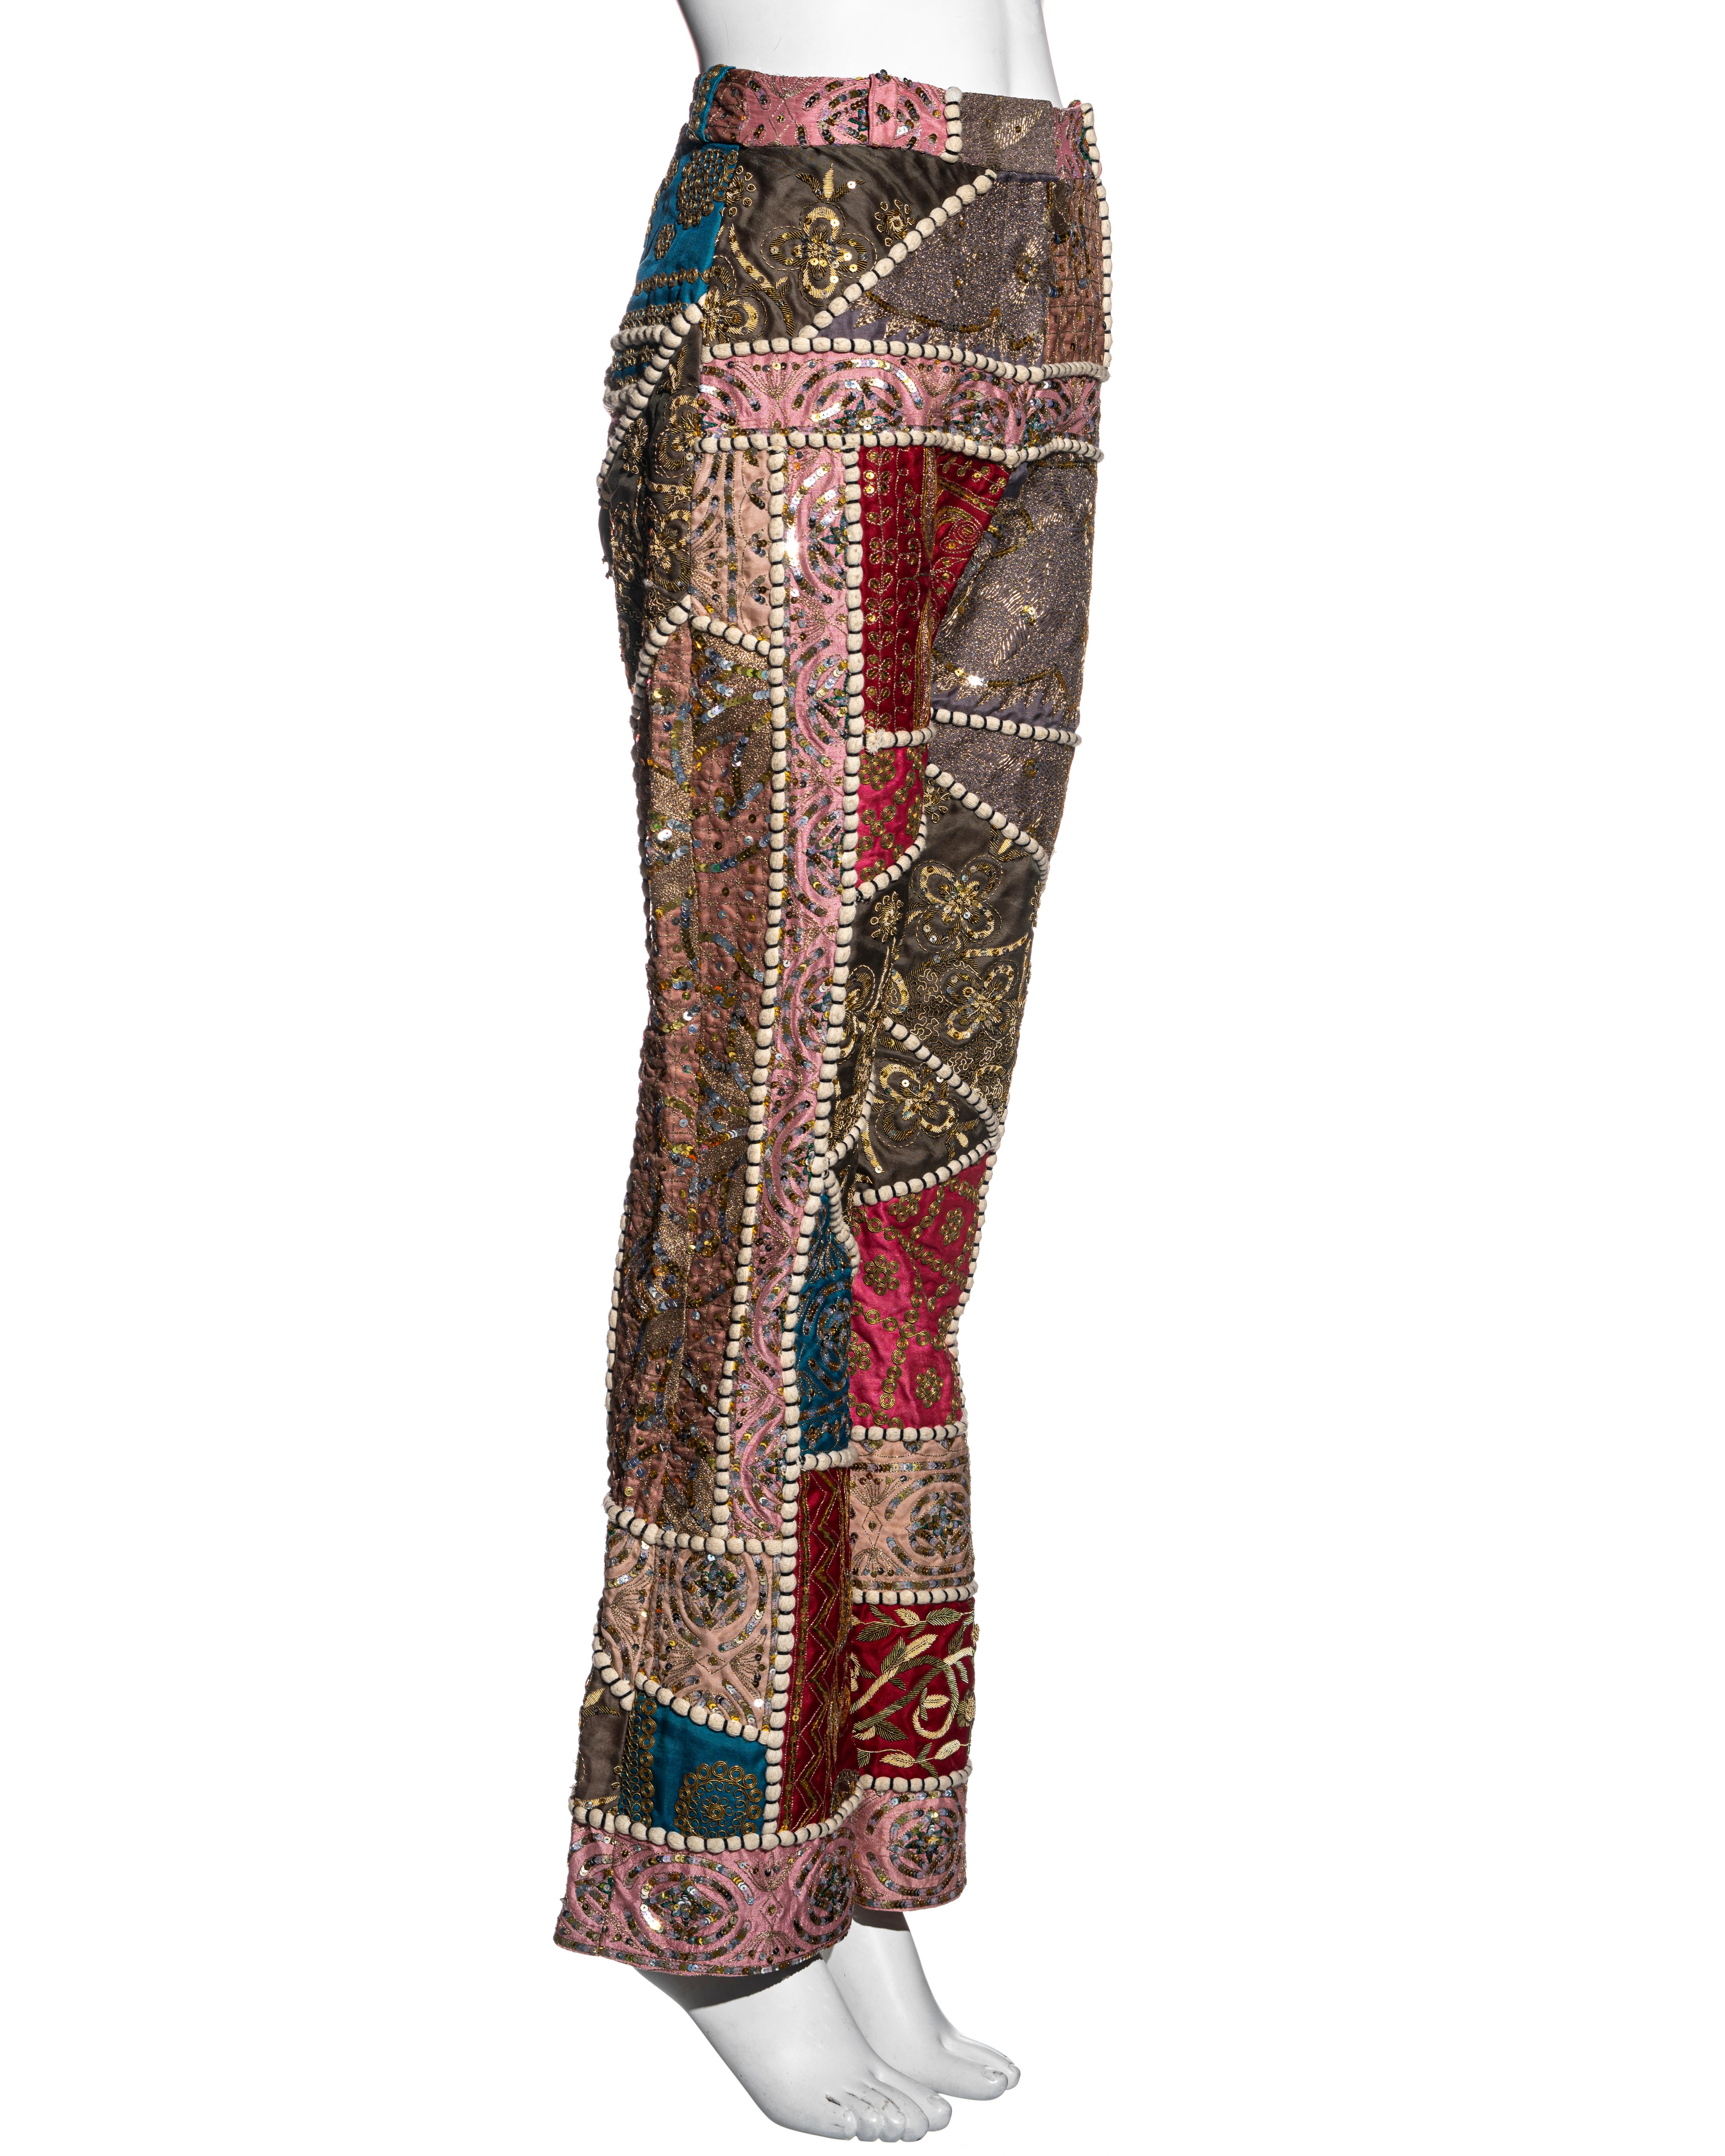 Gianfranco Ferre raw silk patchwork embroidered pants, ss 2002 For Sale 4